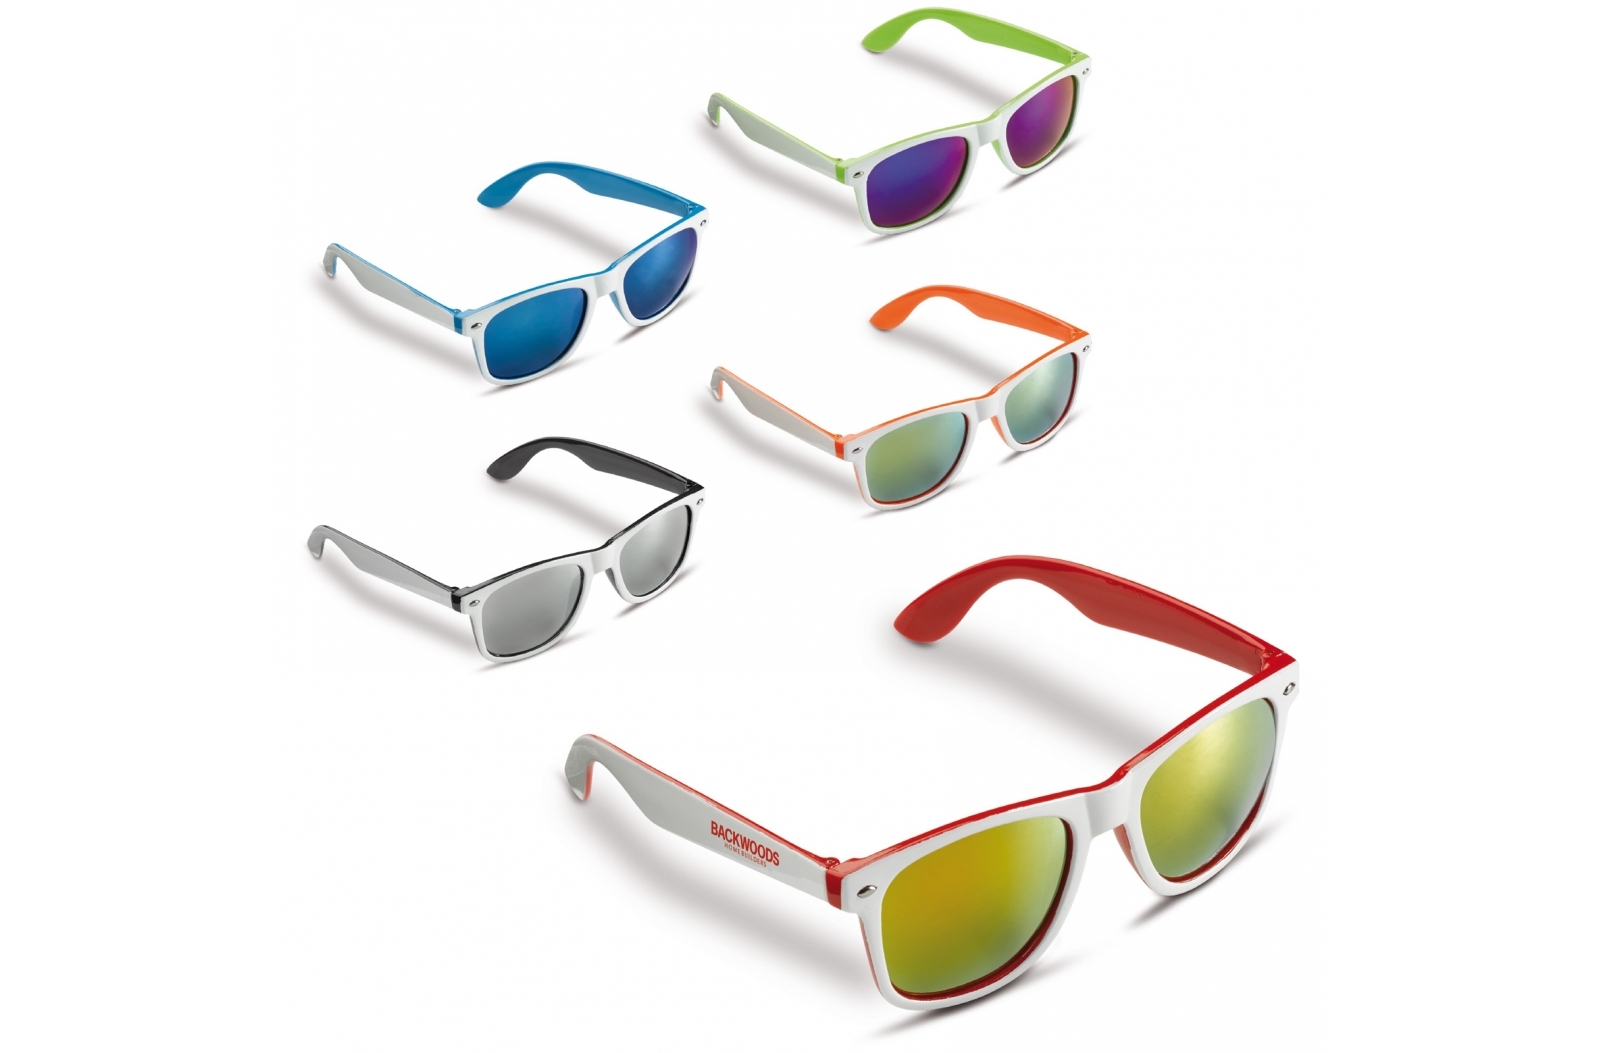 Stylish sunglasses in a two-tone color scheme - Long Wittenham